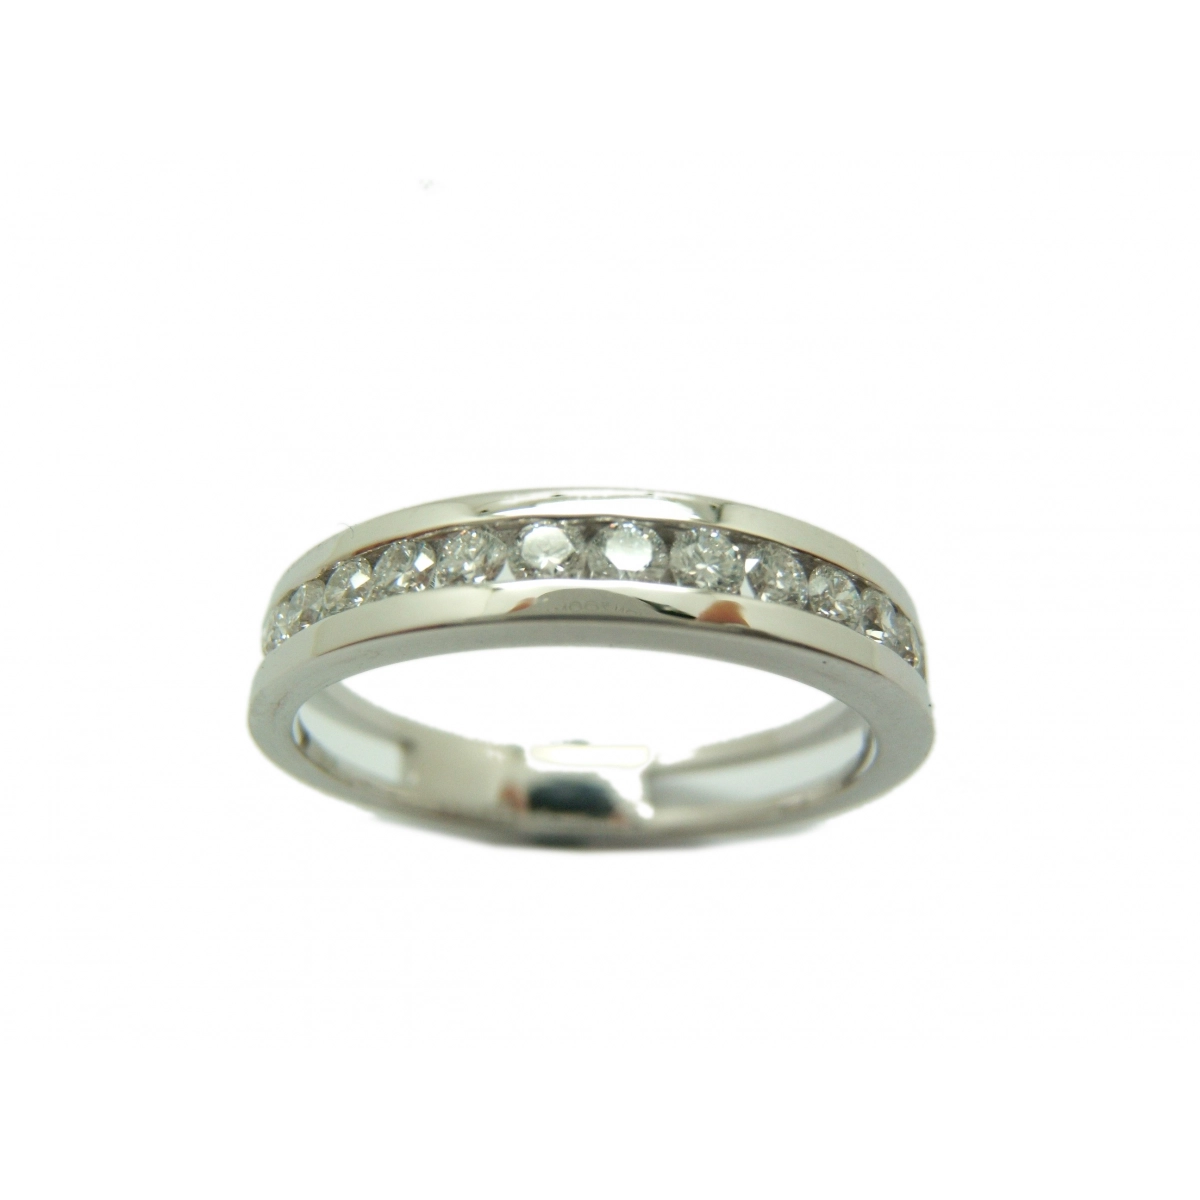 RING ALLIANCE WHITE GOLD AND DIAMONDS. A-412 B-79